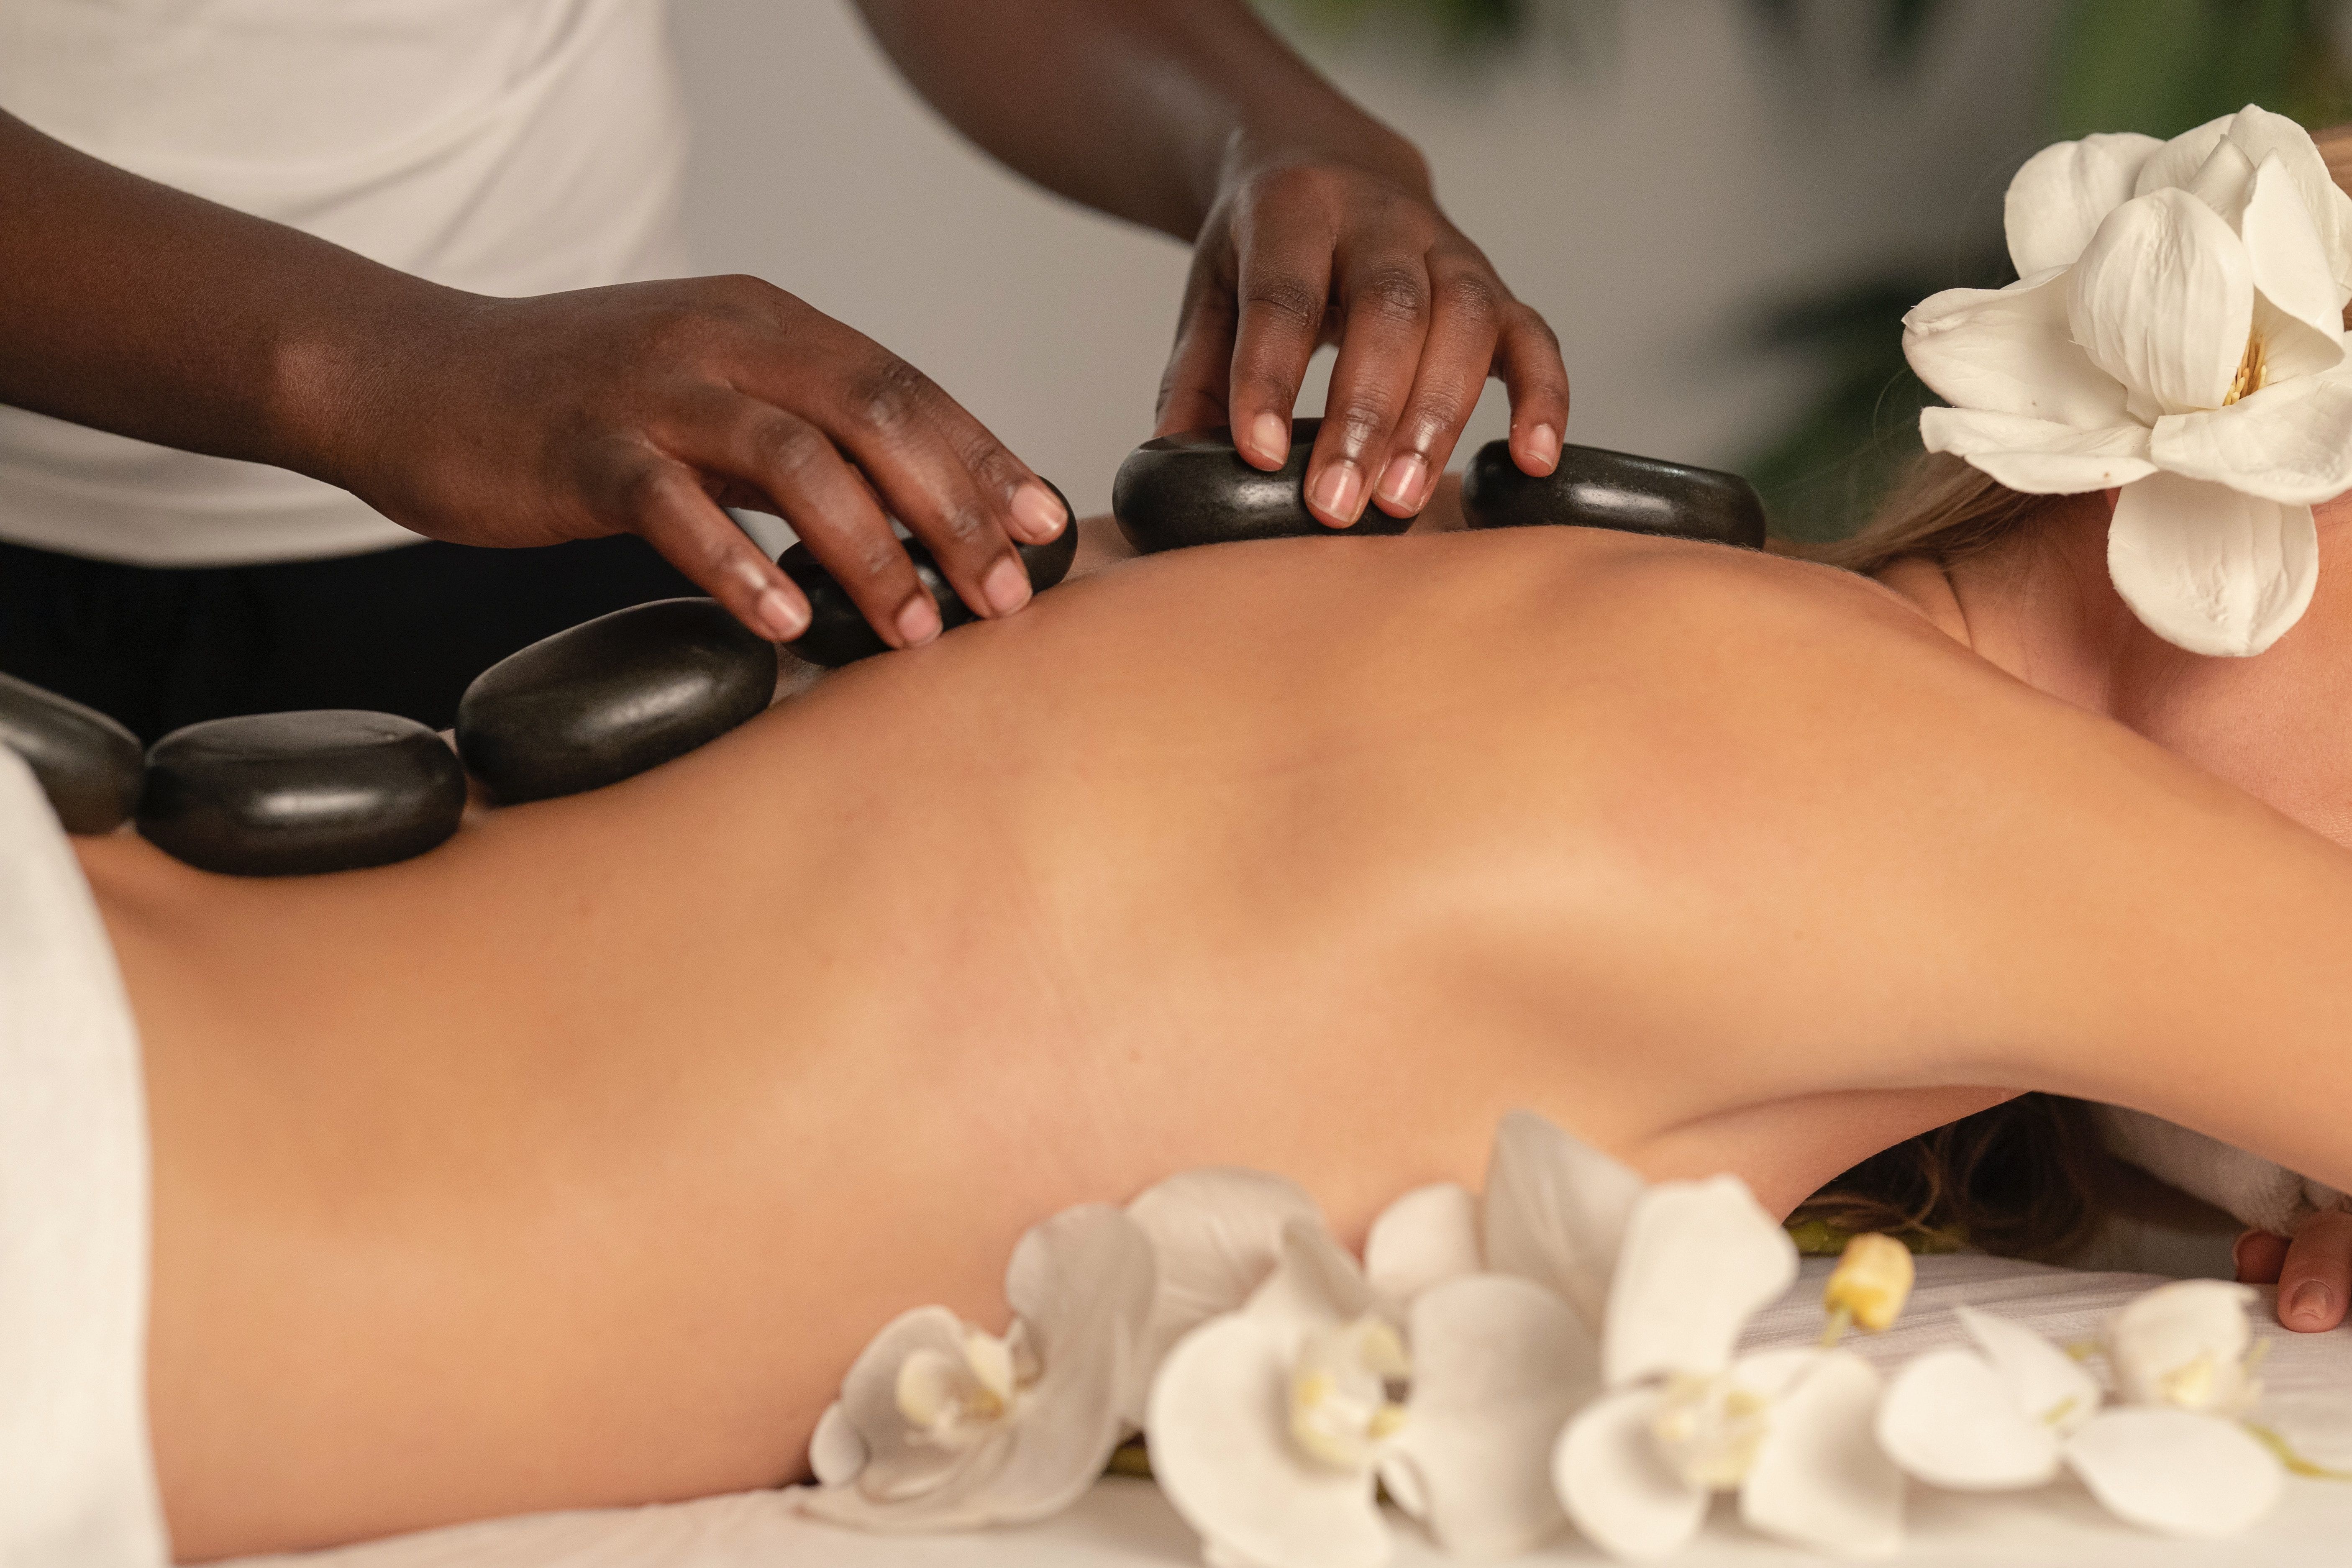 Applying stones to a woman's back for spa treatment 